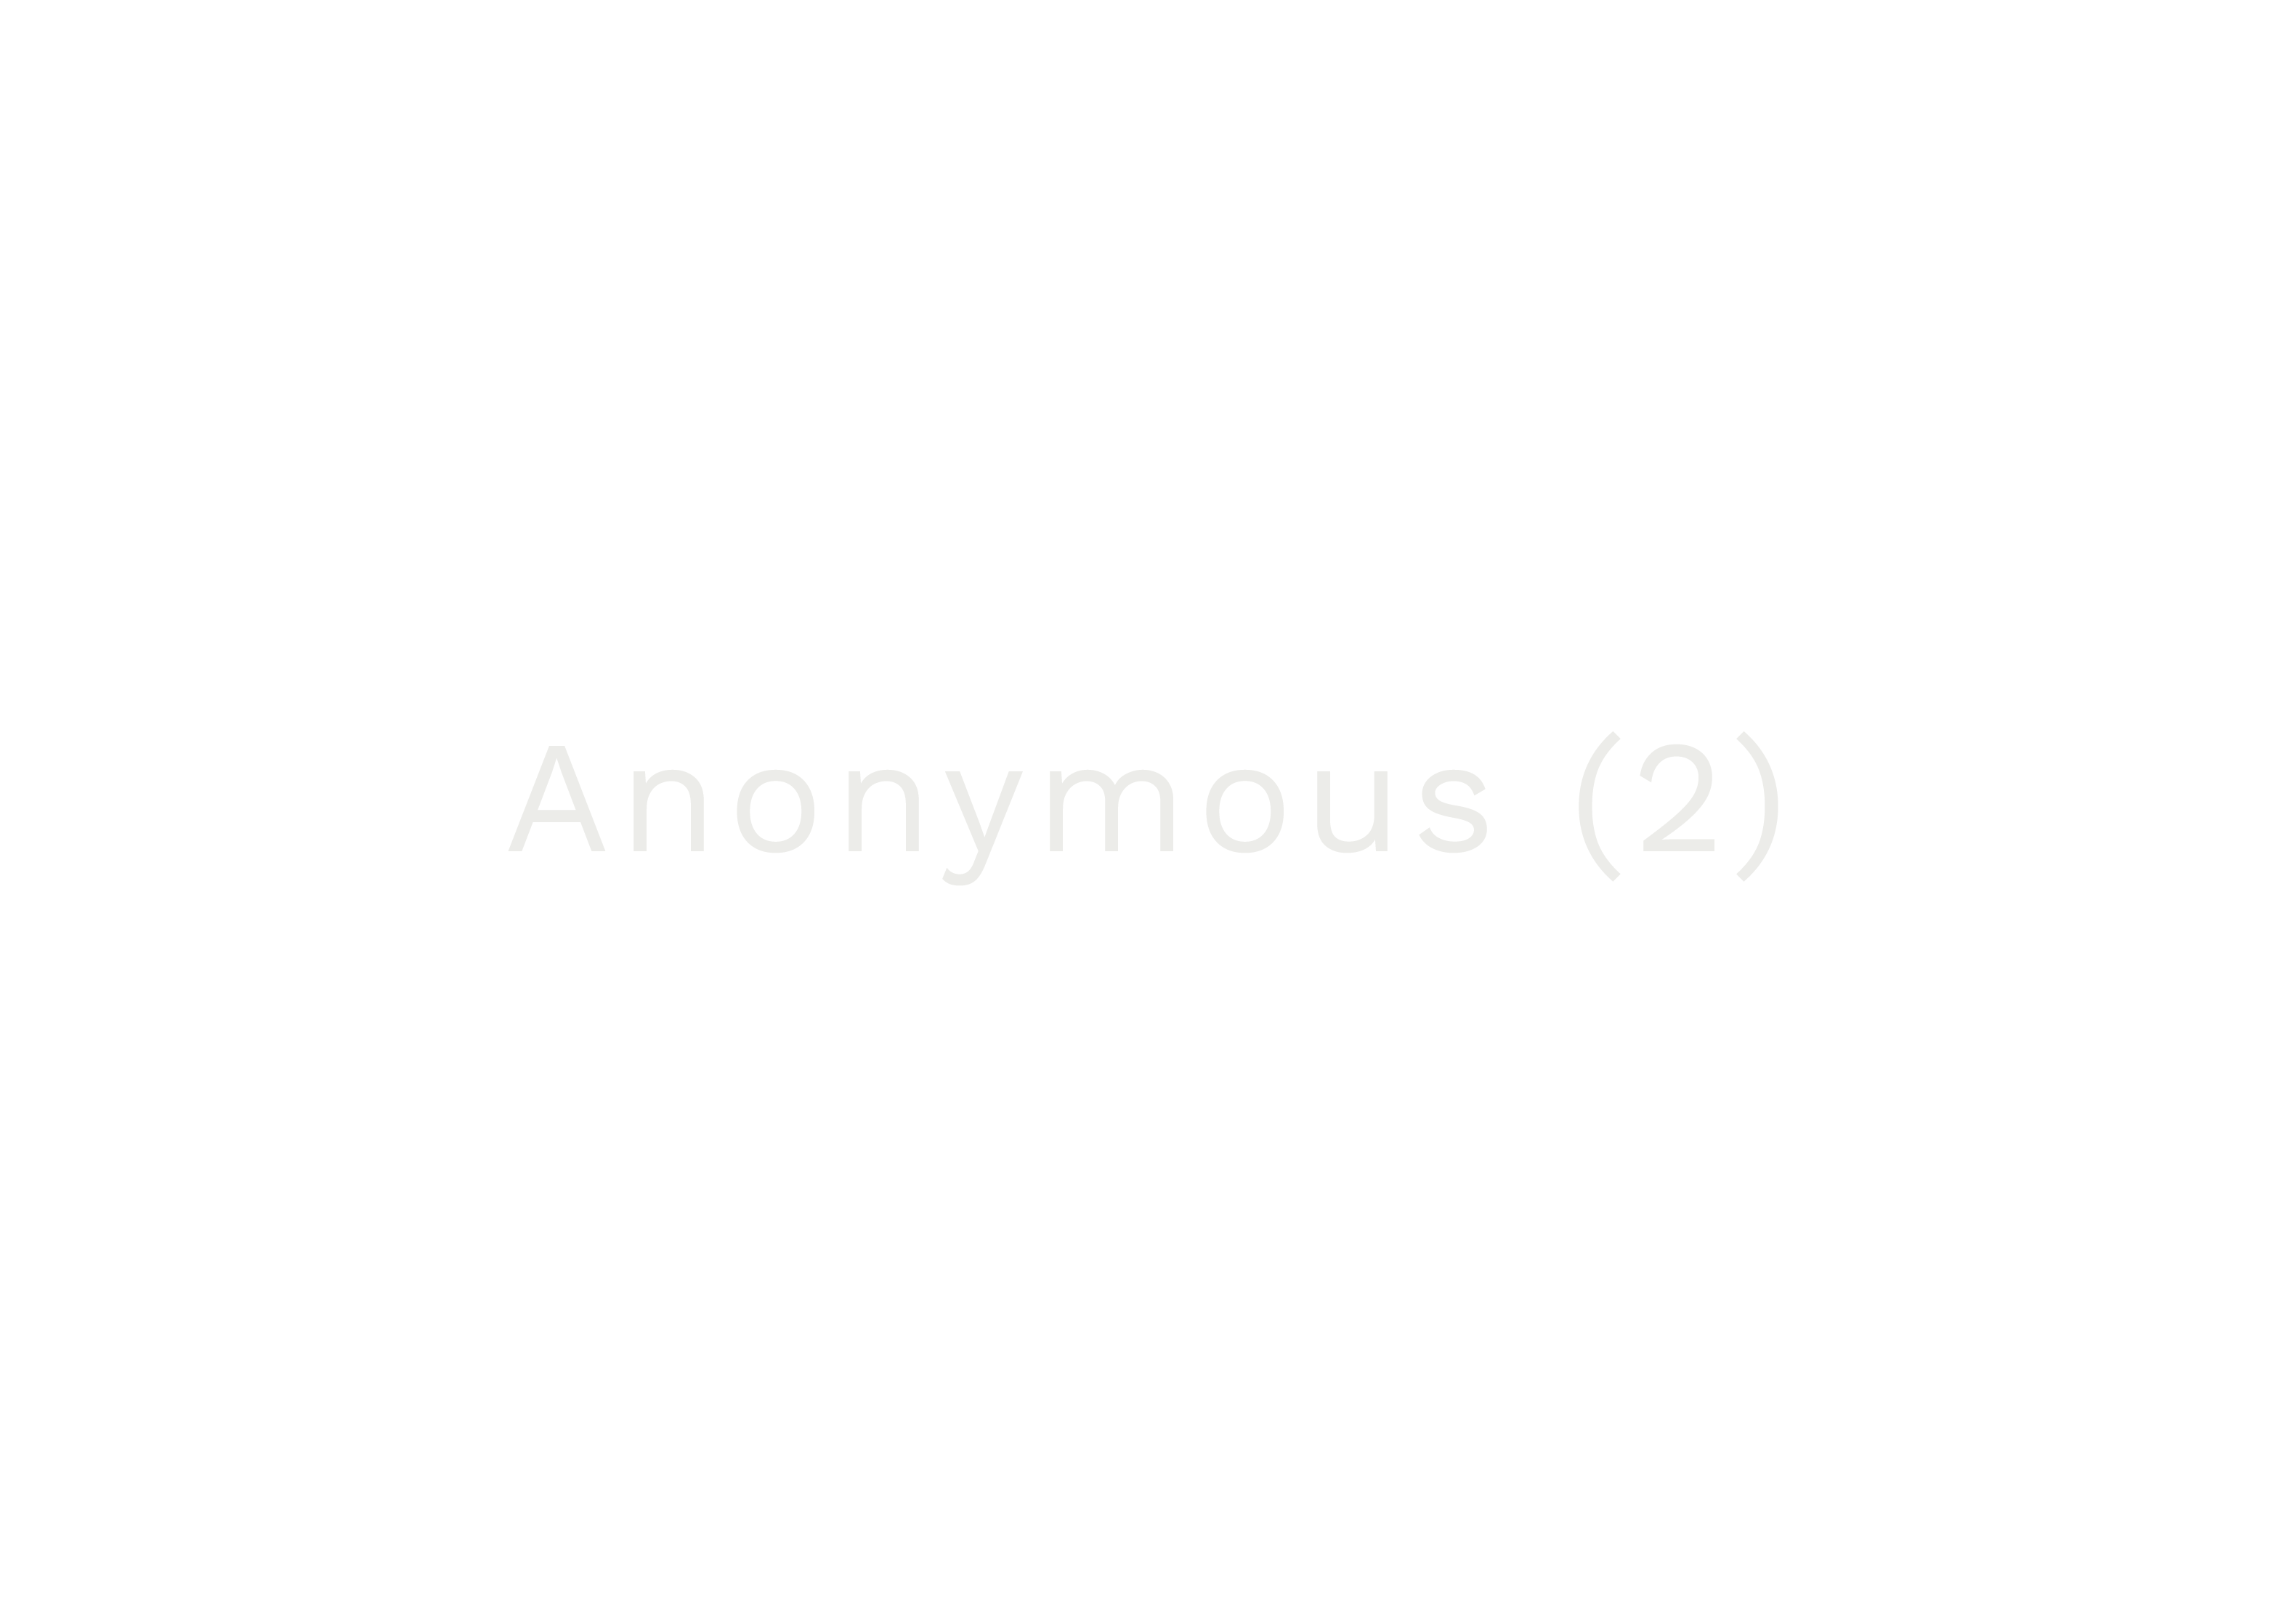 In Kind Auction Sponsors Anonymous 2